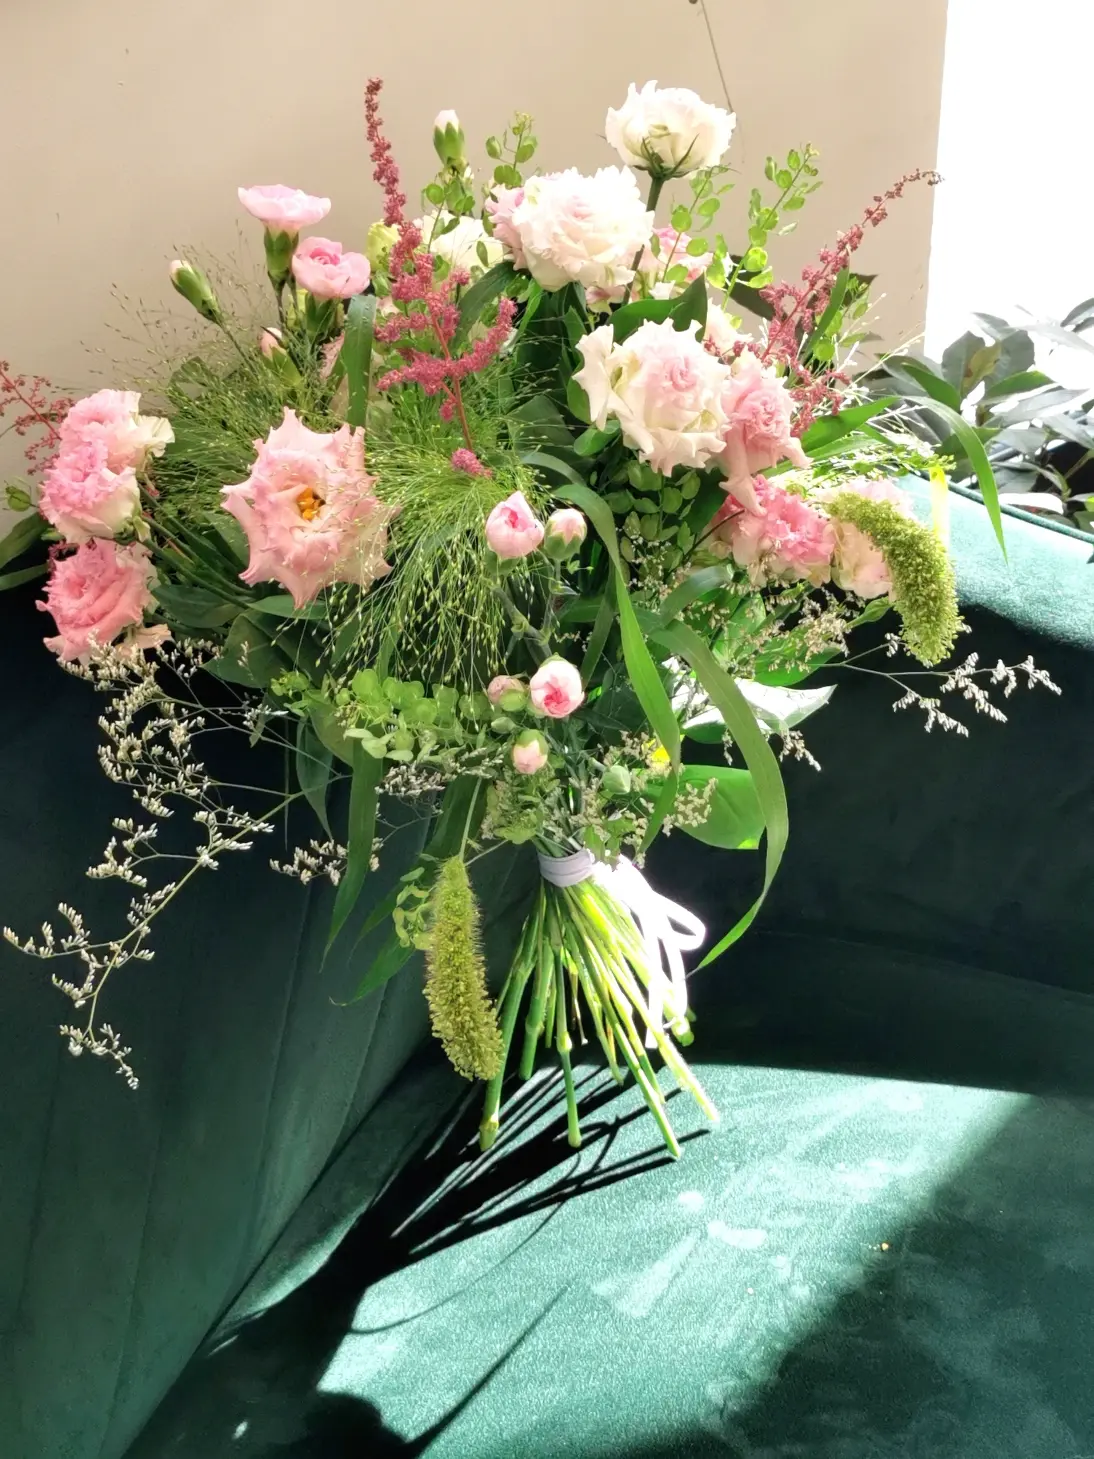 A green and pink delicate proposal for a charming bouquet. Featuring eustomas, carnations and seasonal accessories. Natural and minimalistic.